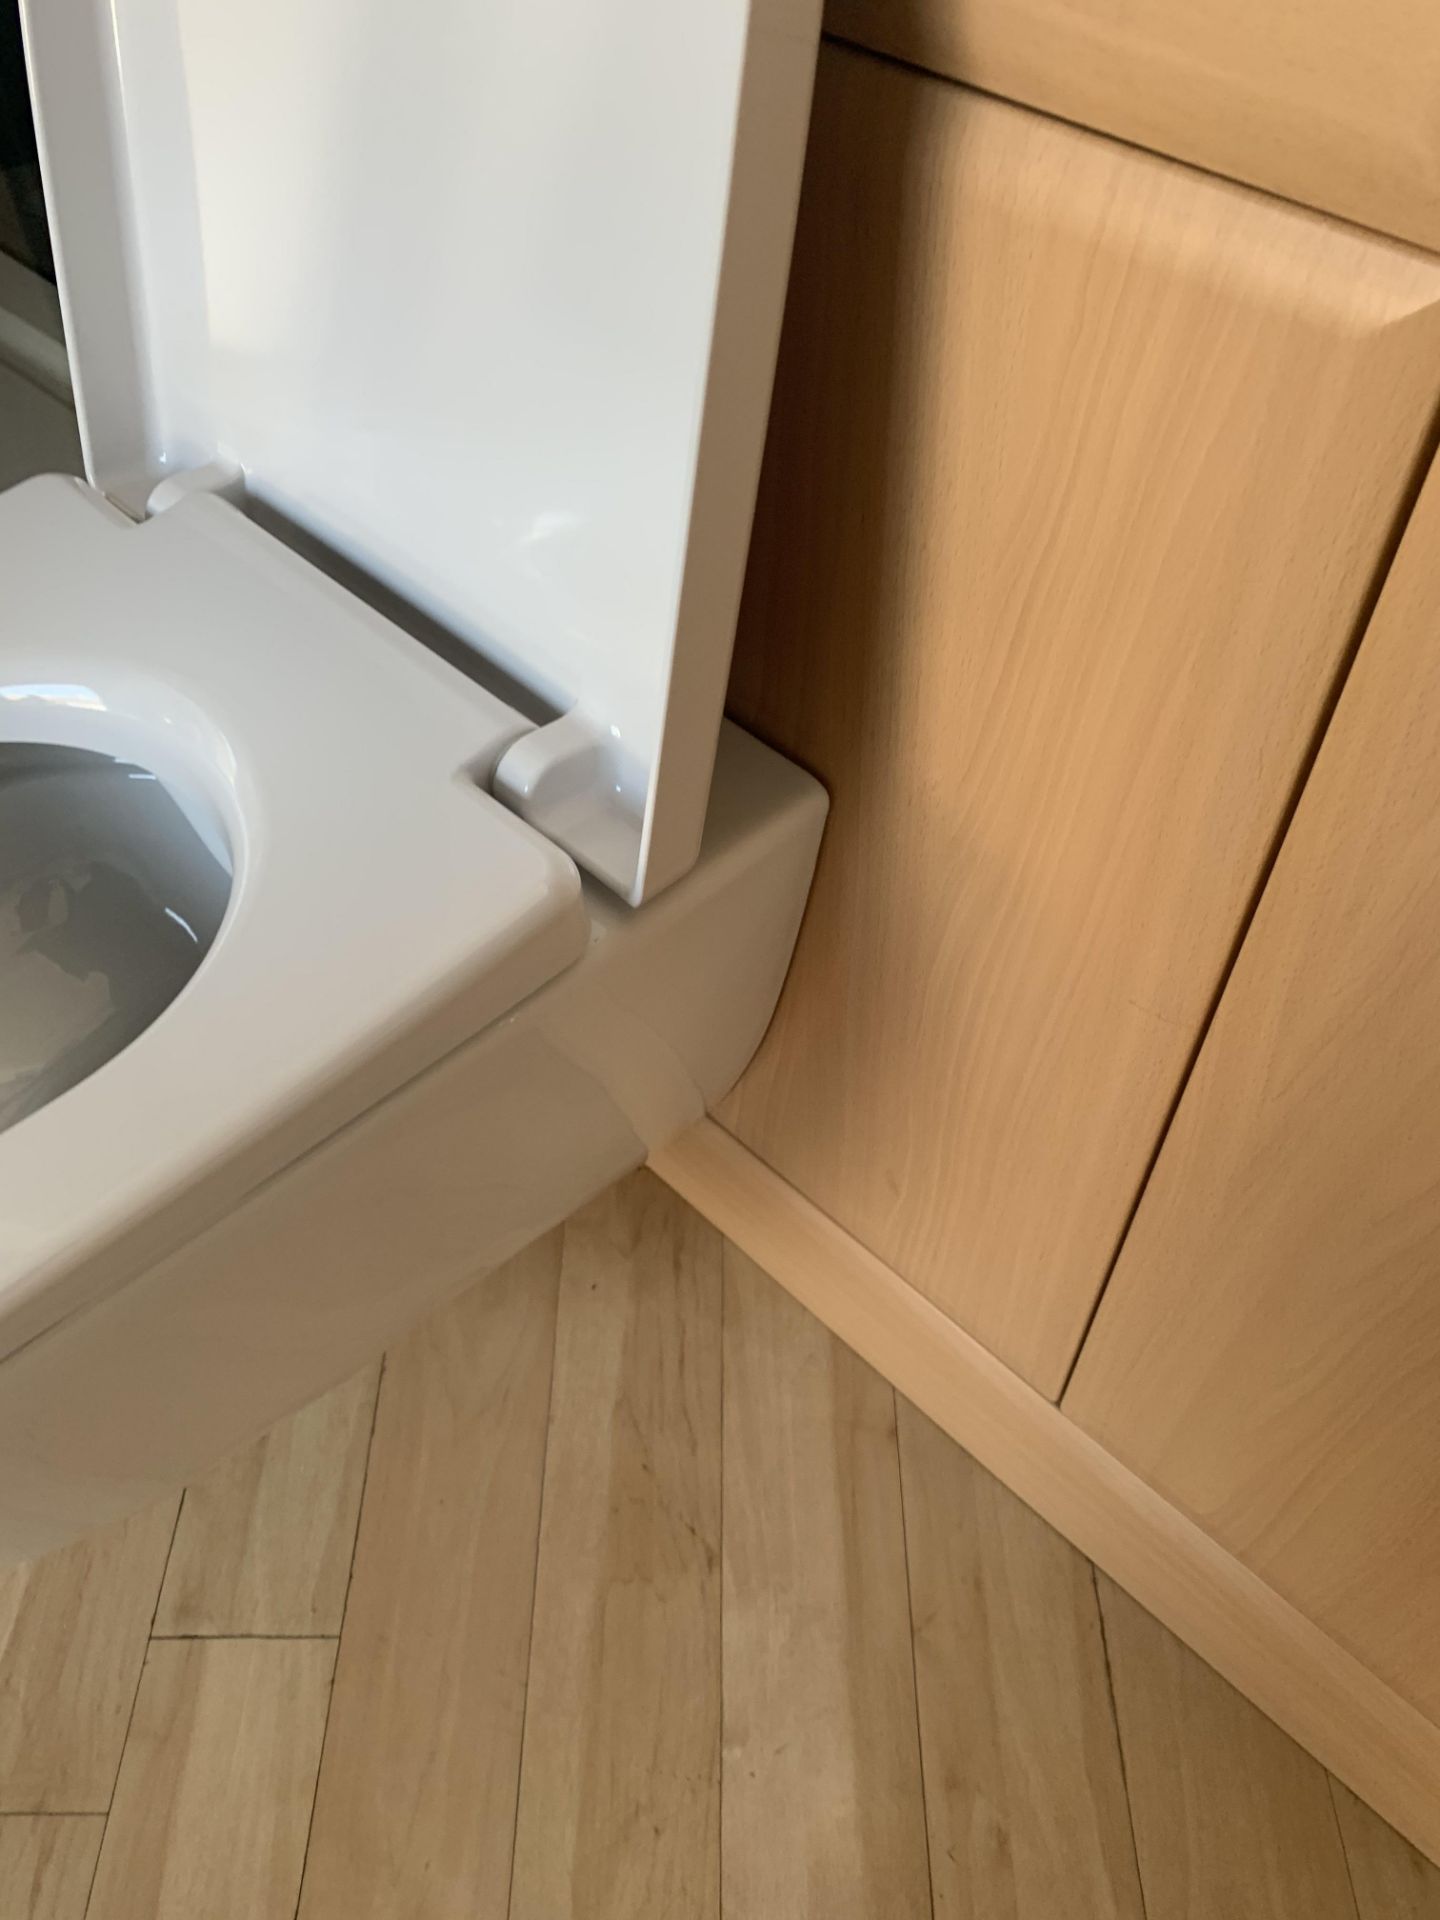 Laufen WC with soft close seat and Basin Unit (no ball cock and fittings) 138 long - Image 4 of 4